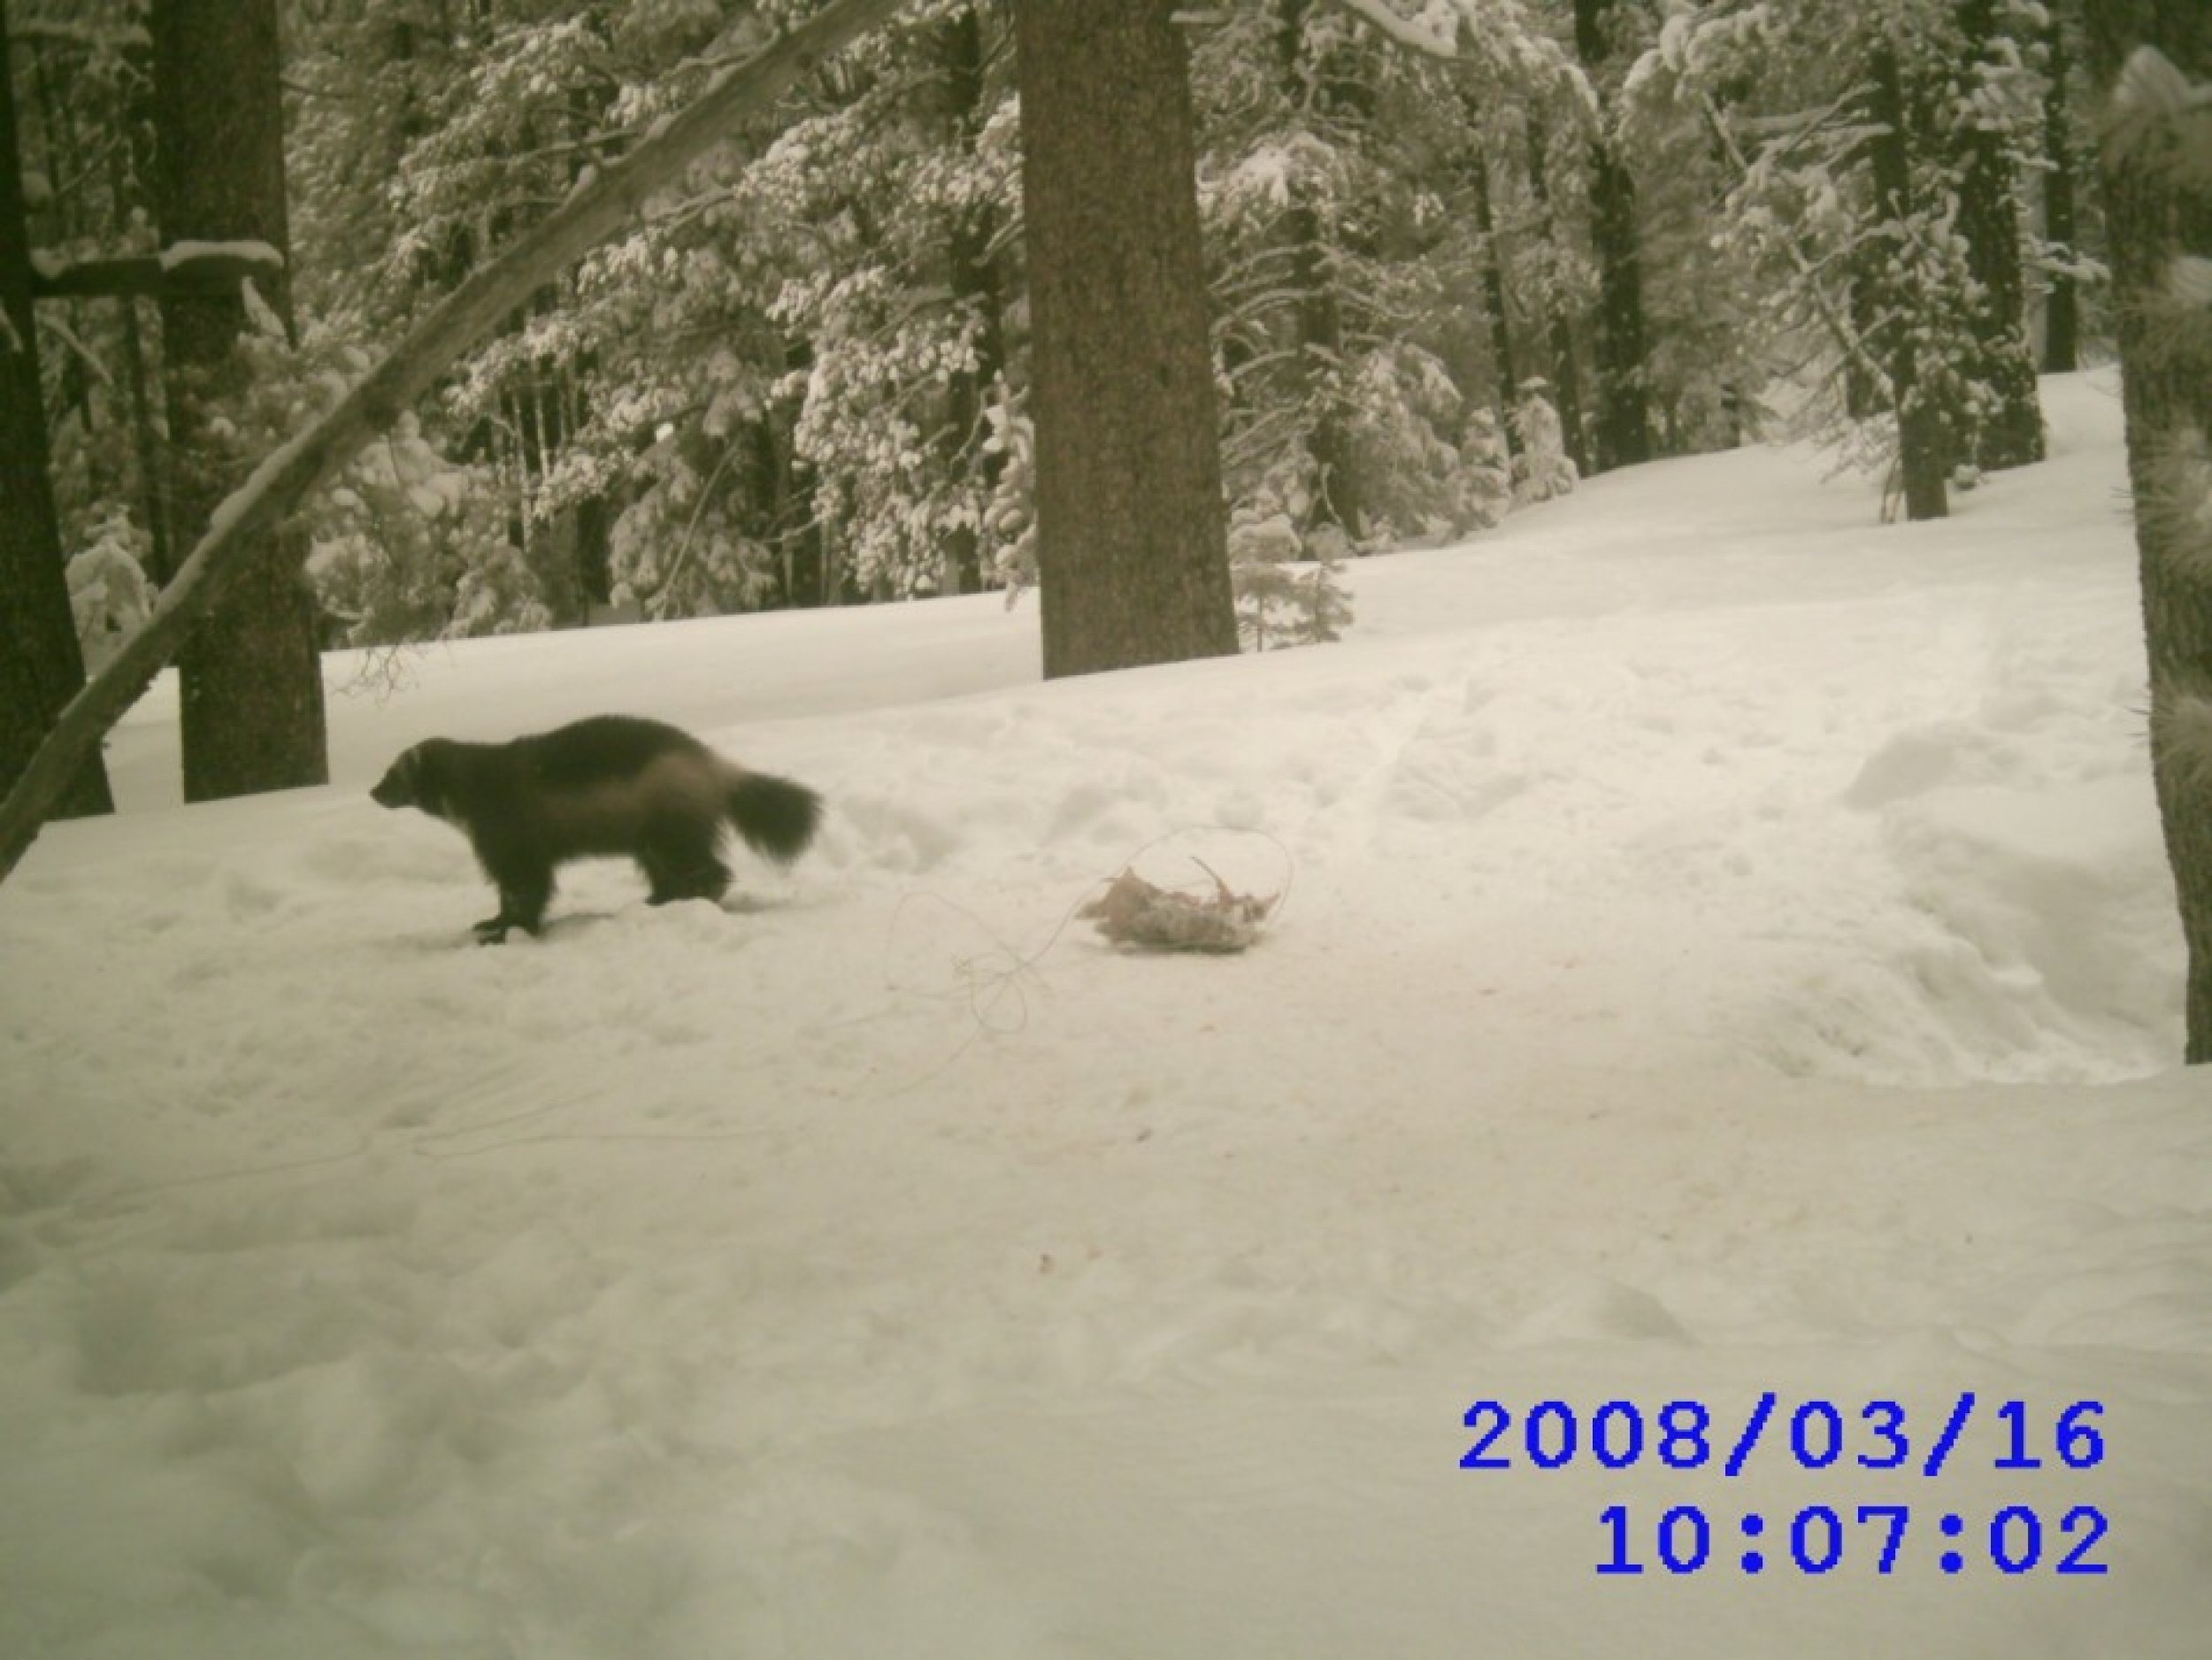 A 2008 sighting of a wolverine, the third, in the Tahoe National Forest, courtesy of the California Fish and Game Department of Forestry.